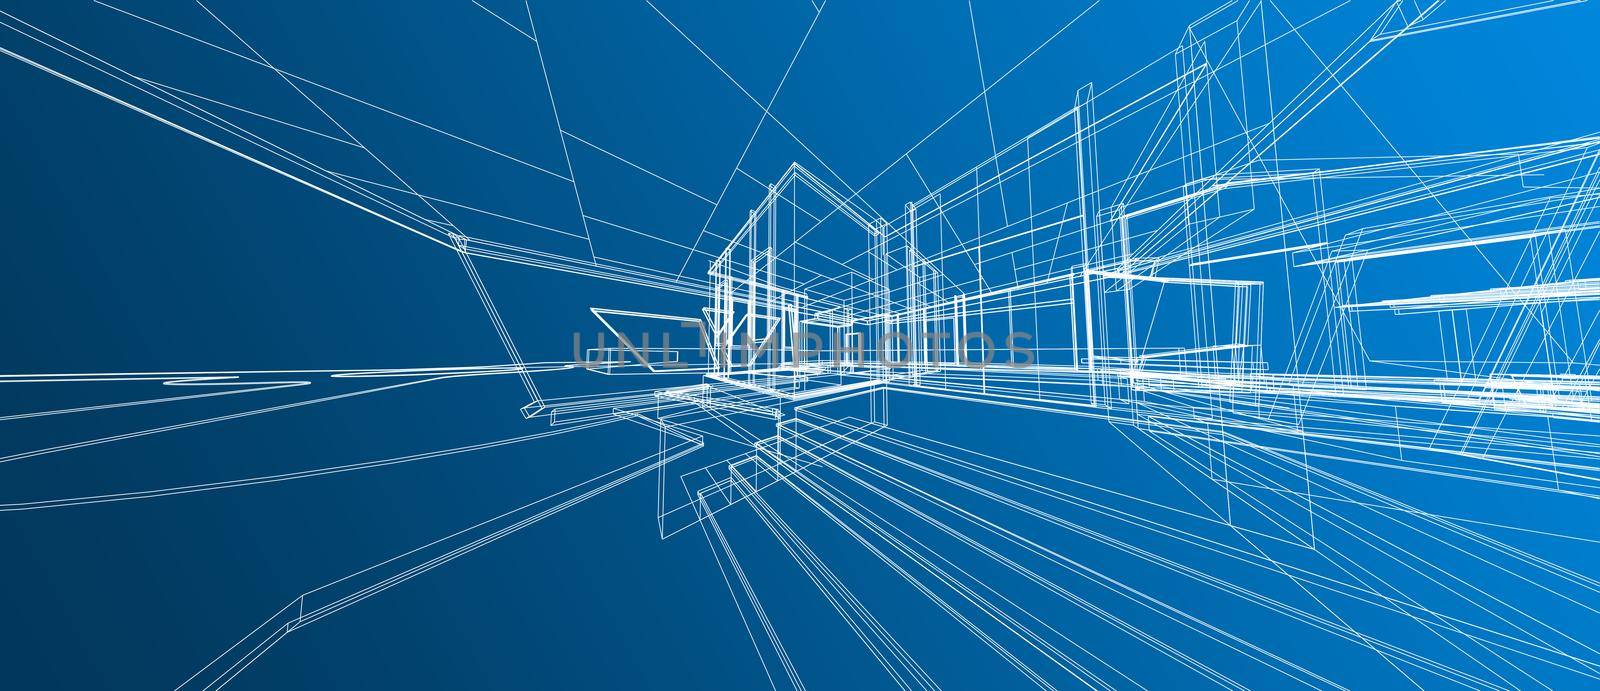 Architecture house space design concept 3d perspective wireframe rendering over blue background computer smart technology by Petrichor